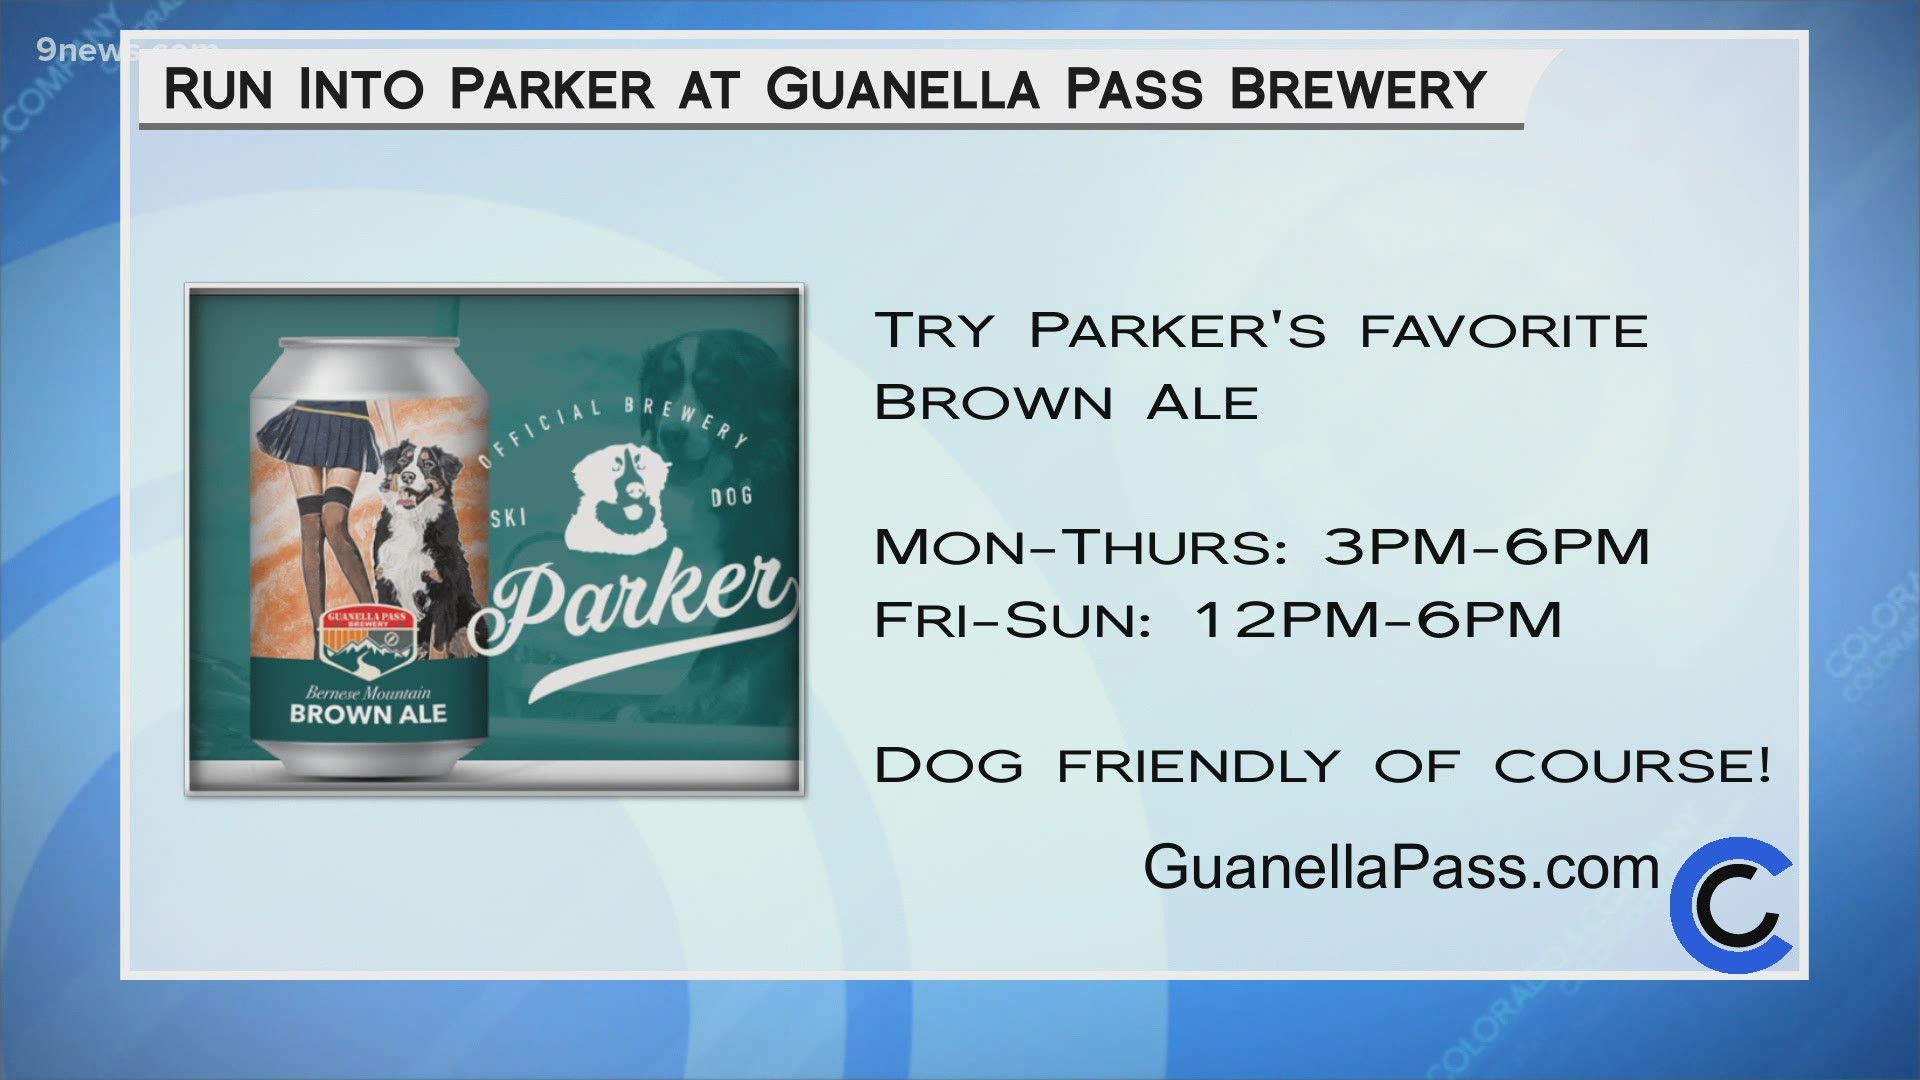 Visit Beautiful Georgetown today. Stop by Guanella Pass Brewery and try out Mayor Parker's favorite Brown Ale.